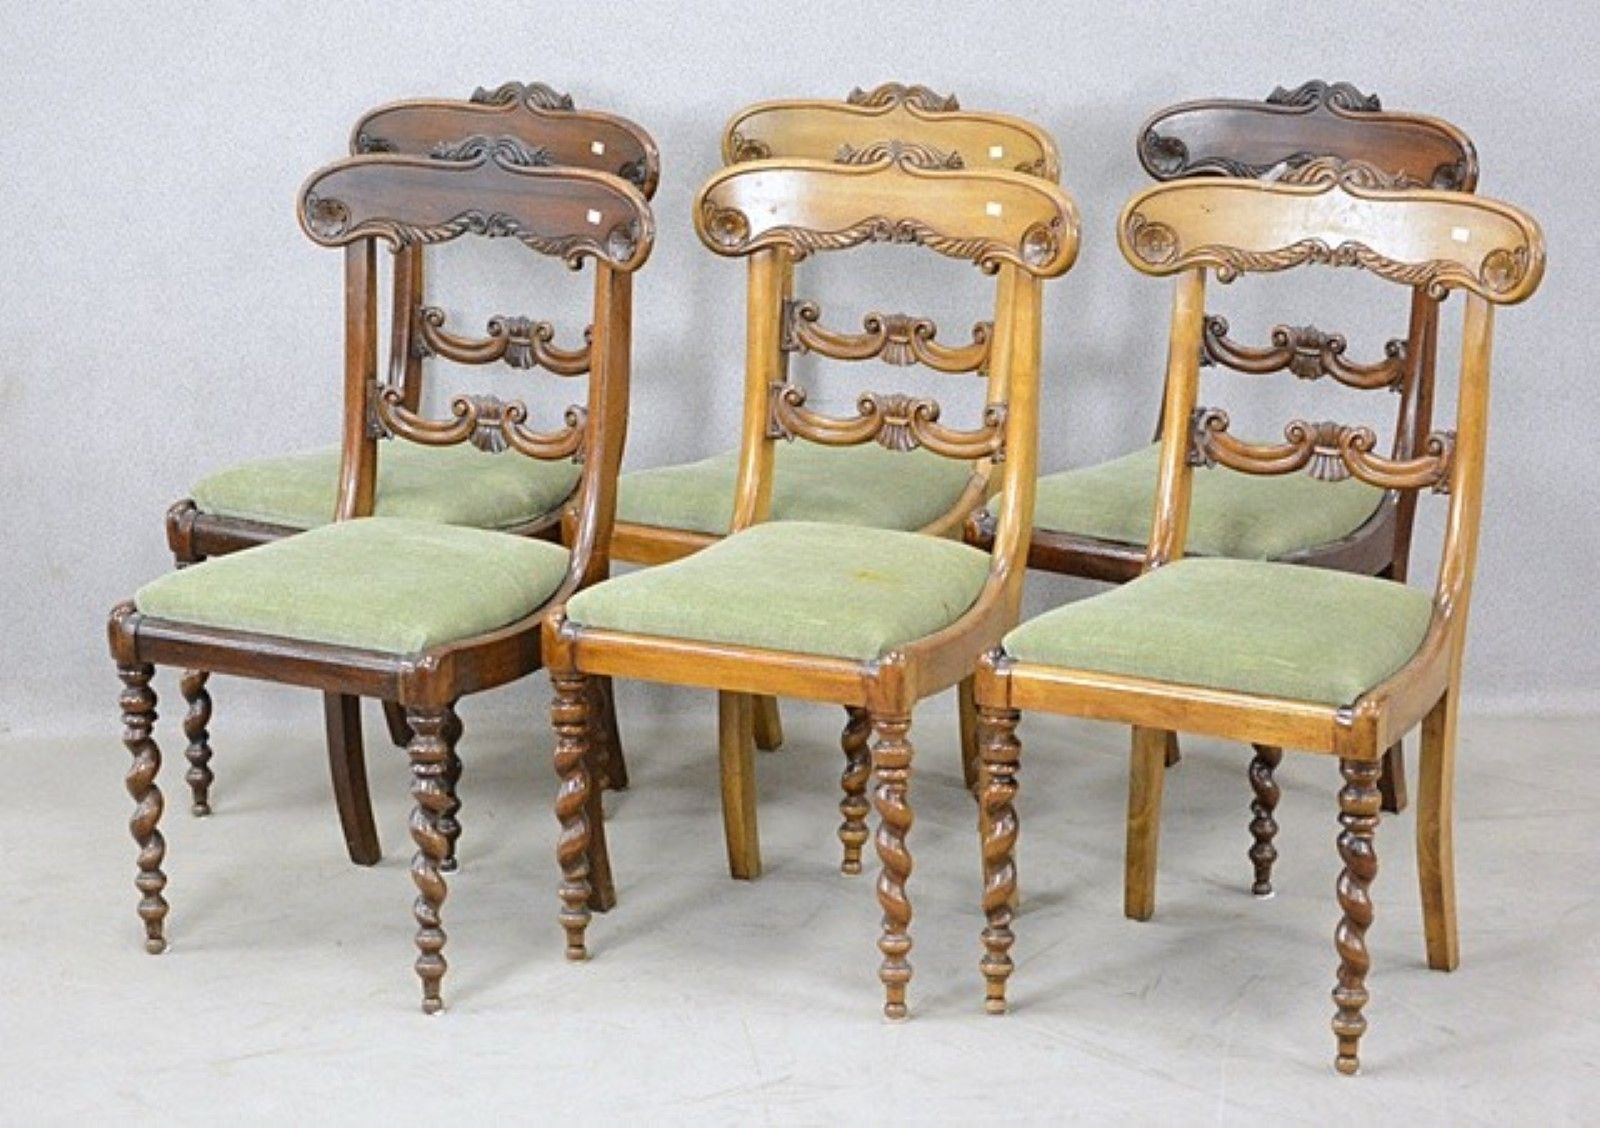 Null Convolute 6 armchairs,mahogany,elaborately worked,around 1850,together